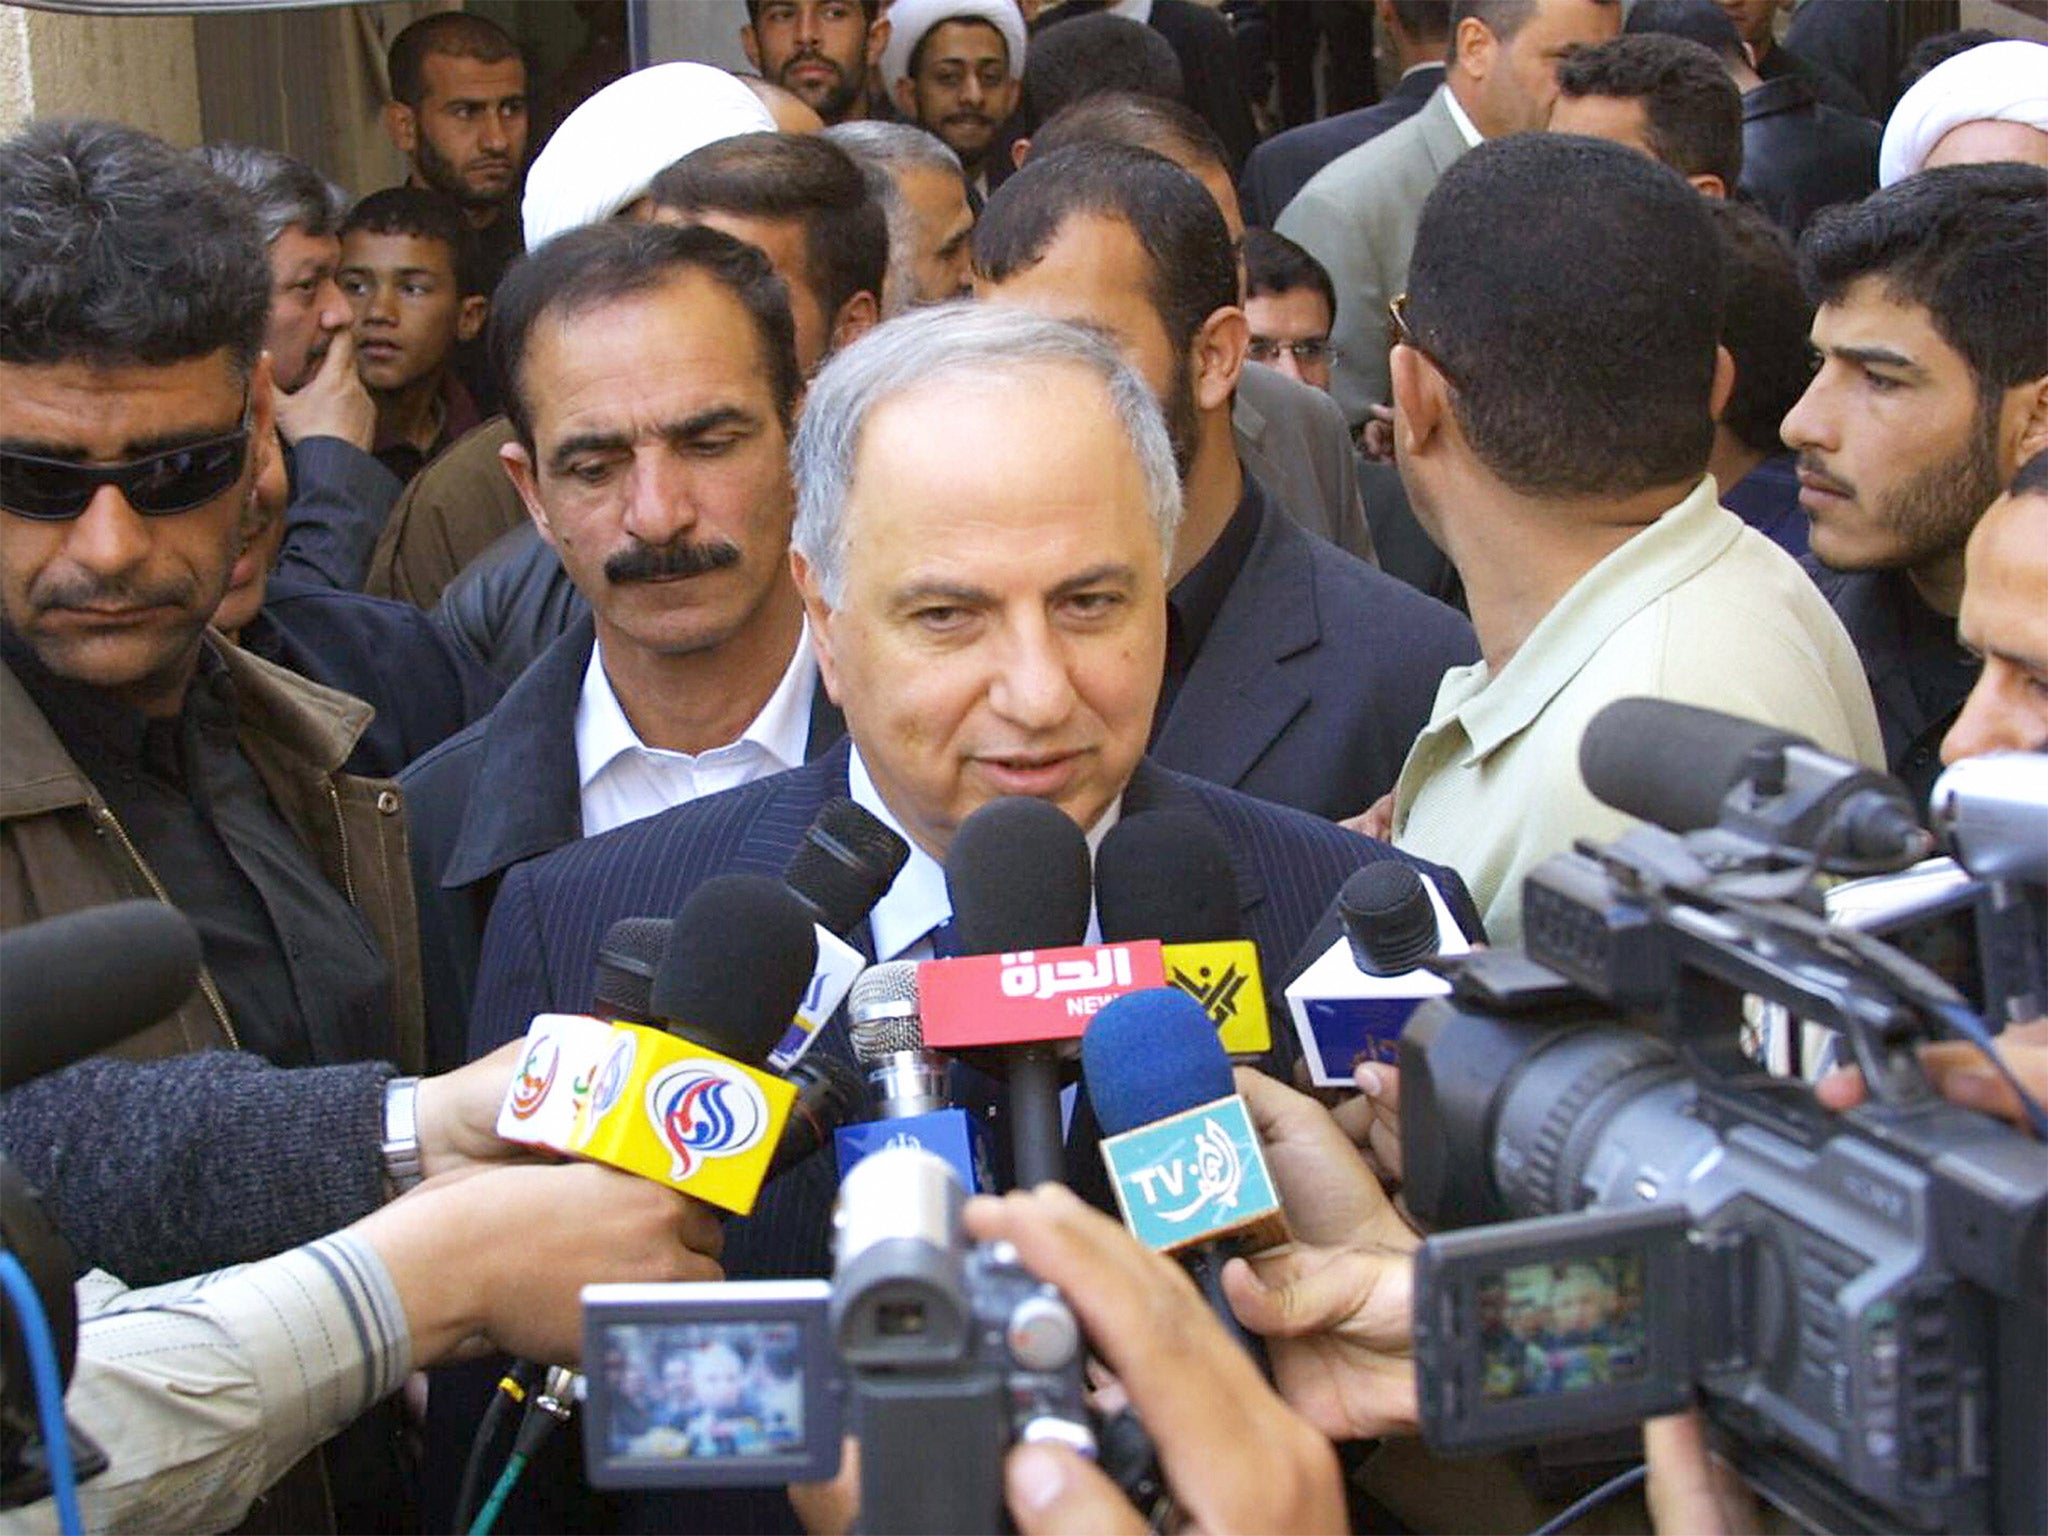 Ahmed Chalabi, a member of the Unified Iraqi Alliance, in the Shia Muslim city of Najaf in 2005 before the Shias came to power for the first time in an Arab country in more than 1,000 years (Getty)